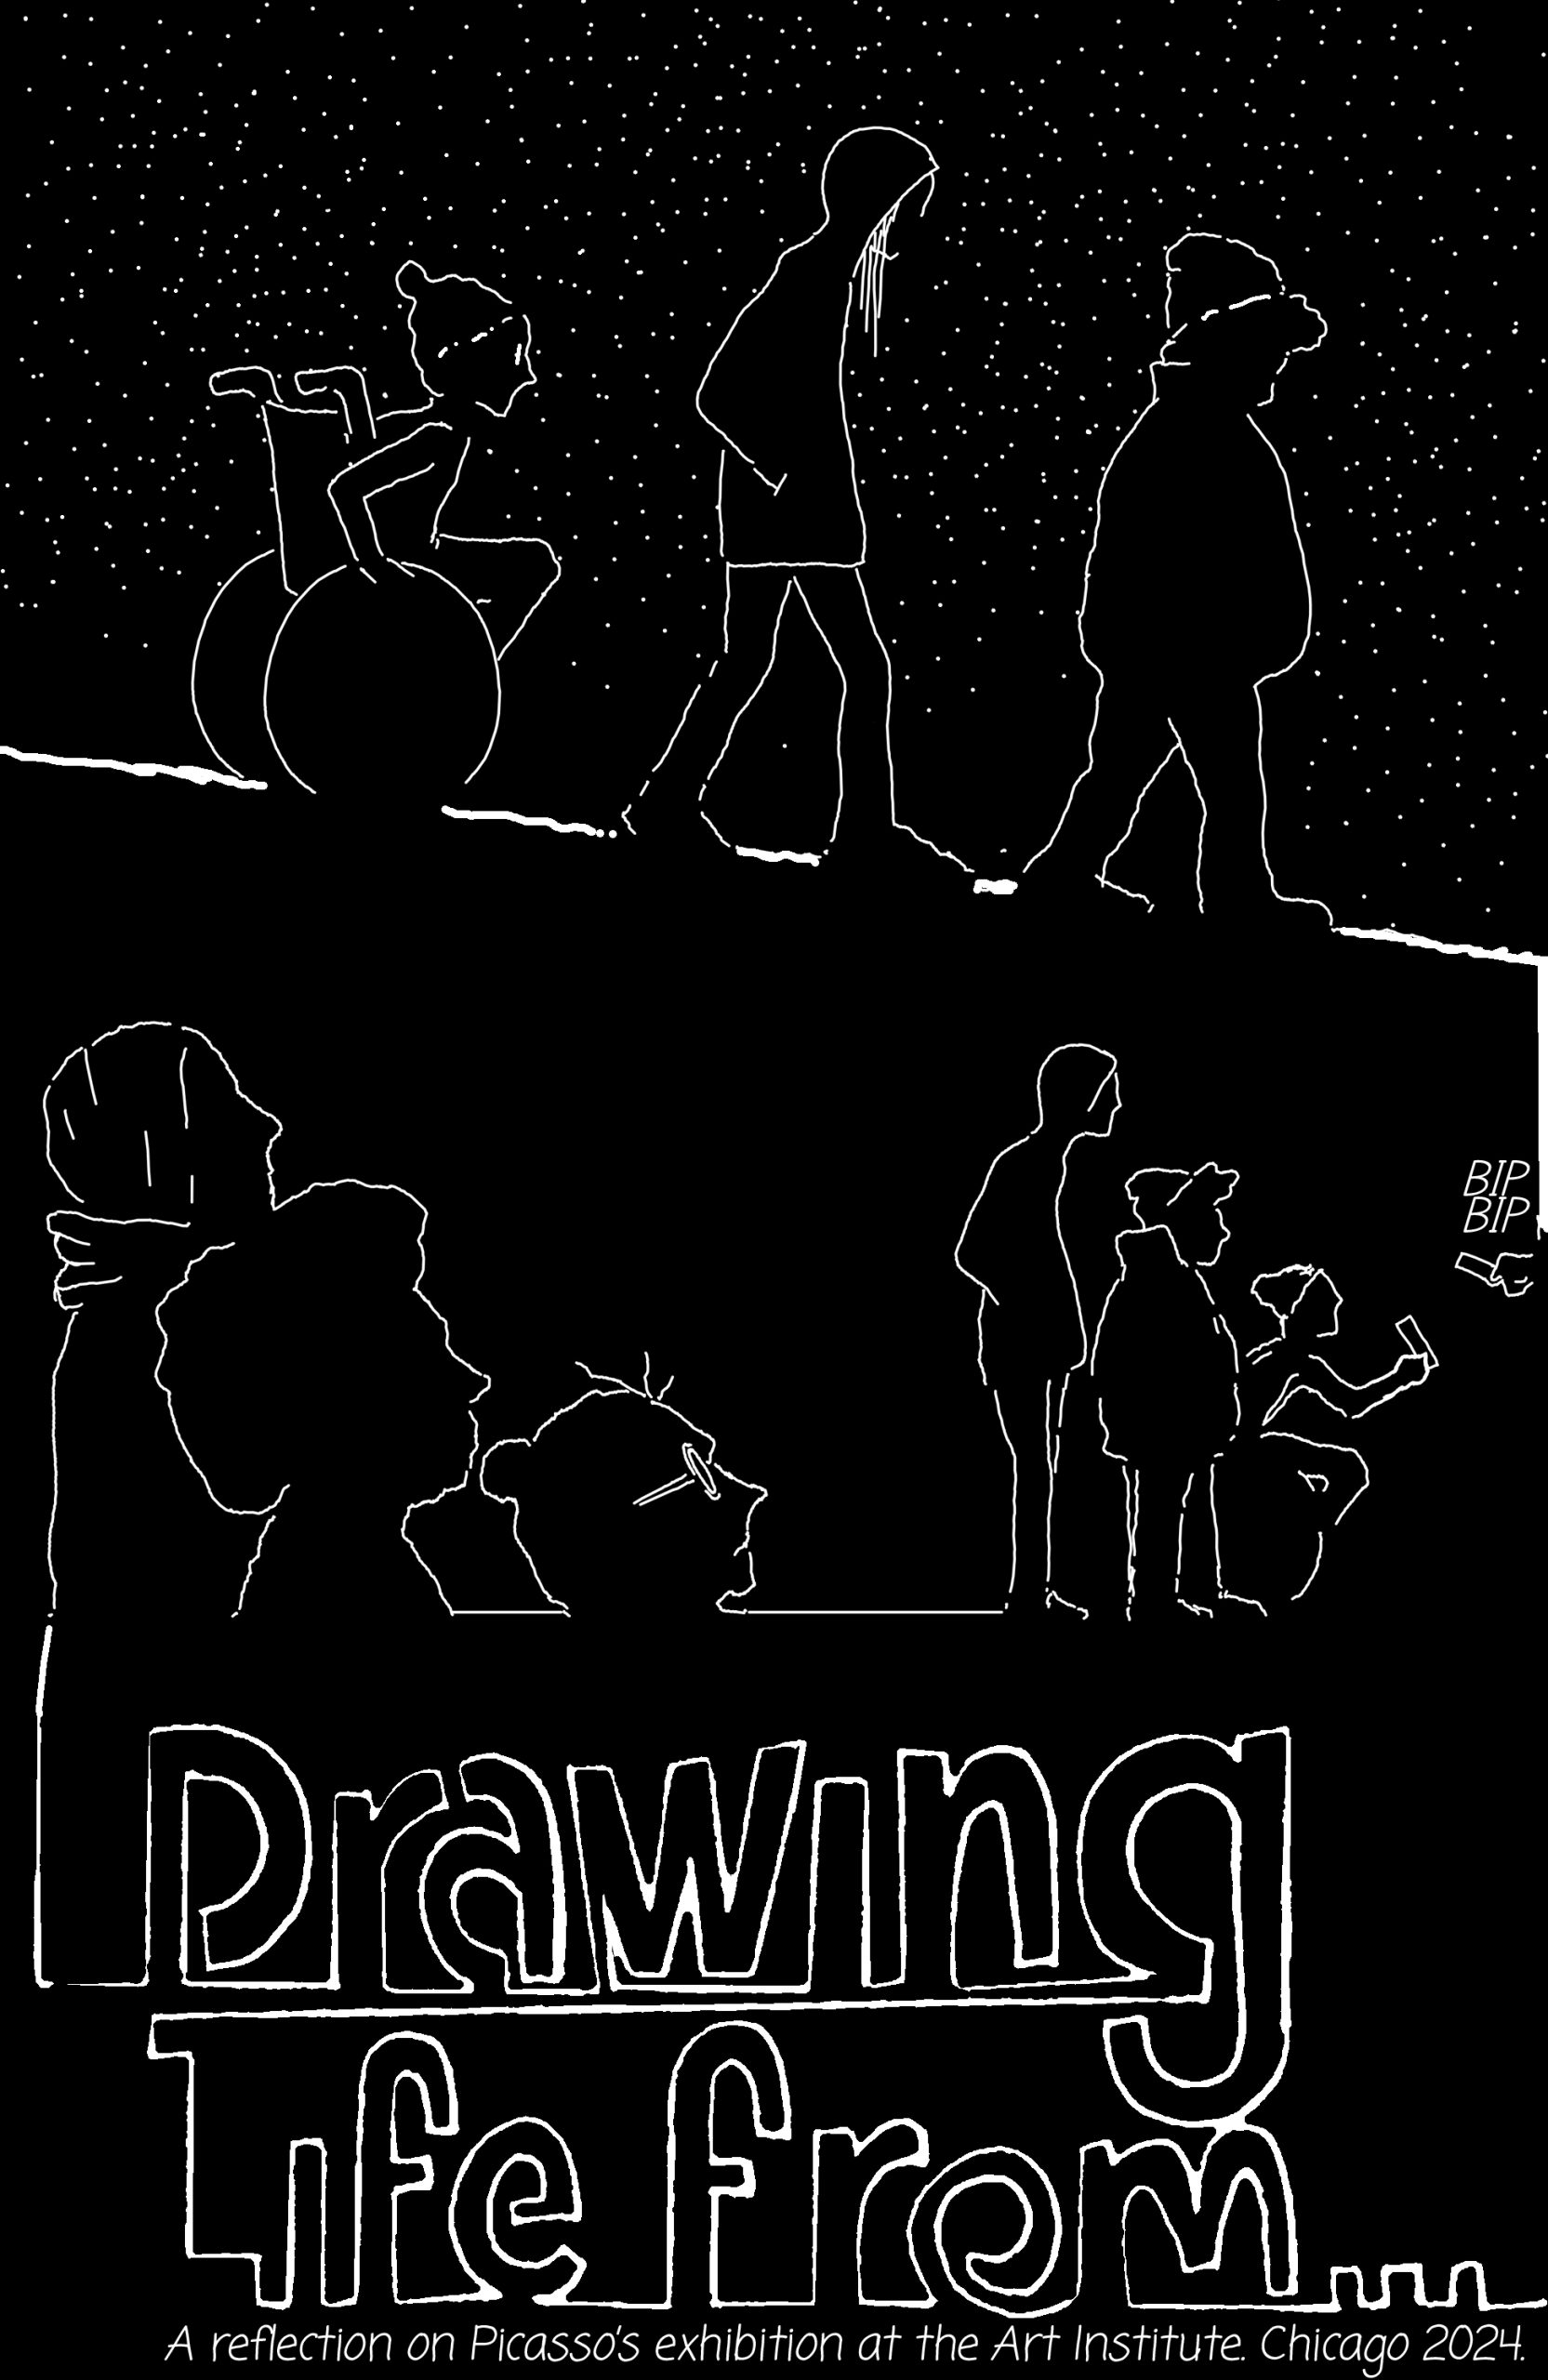 A black and white image of text that reads, "Drawing Life From...a reflection on Picasso's exhibition at the Art Institute Chicago 2024" and has white outlines of side profiles of Carlos Matanalla's bilingual comic characters walking through snow followed by the same characters taking fotos of unseen art.